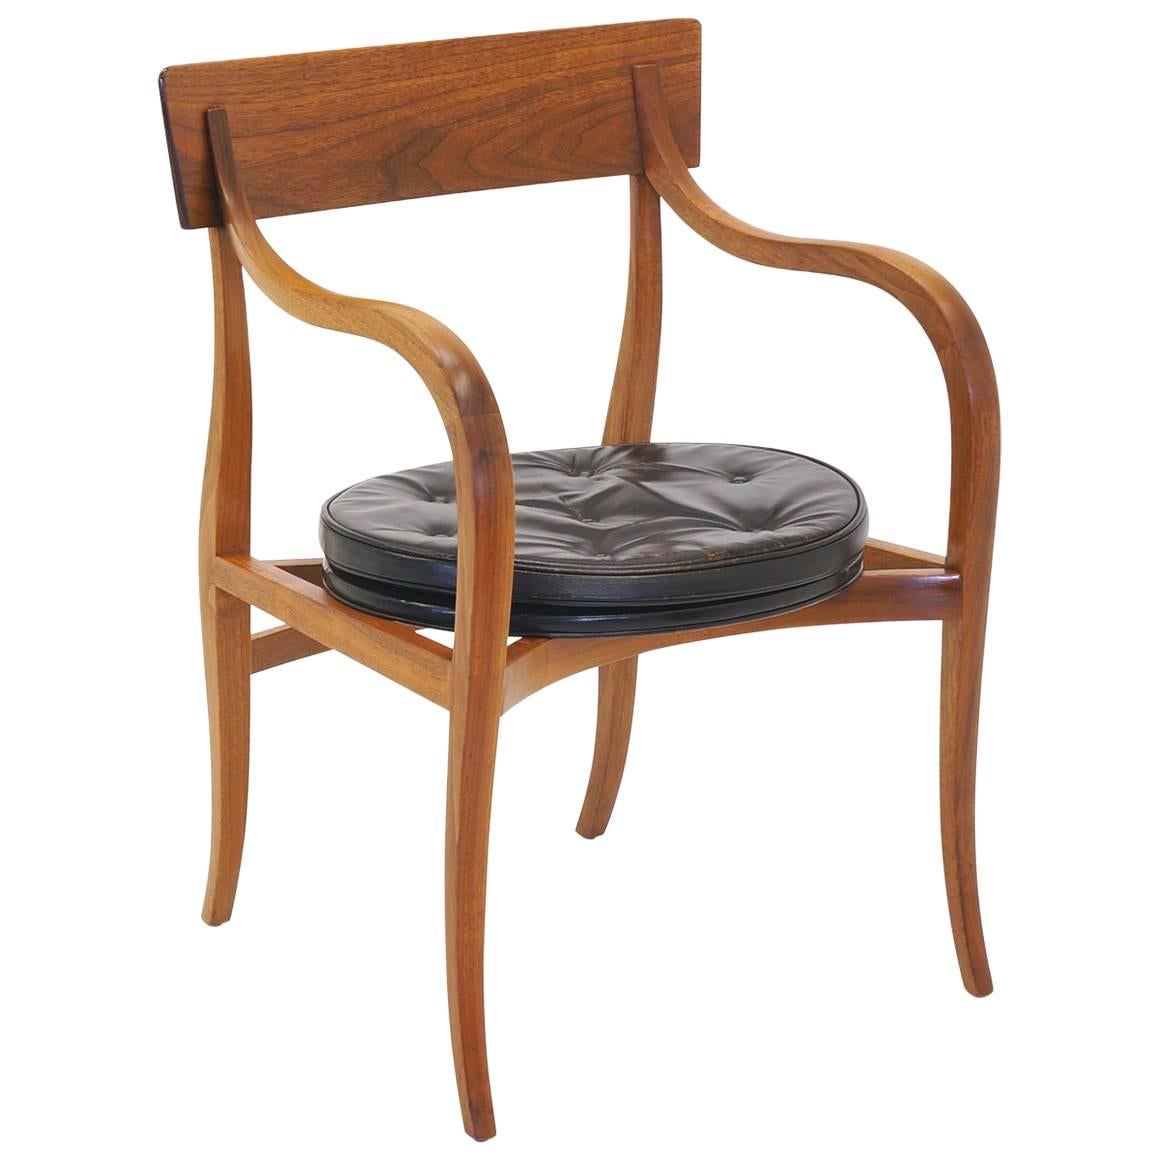 Completely Original Alexandria Chair Designed by Edward Wormley for Dunbar